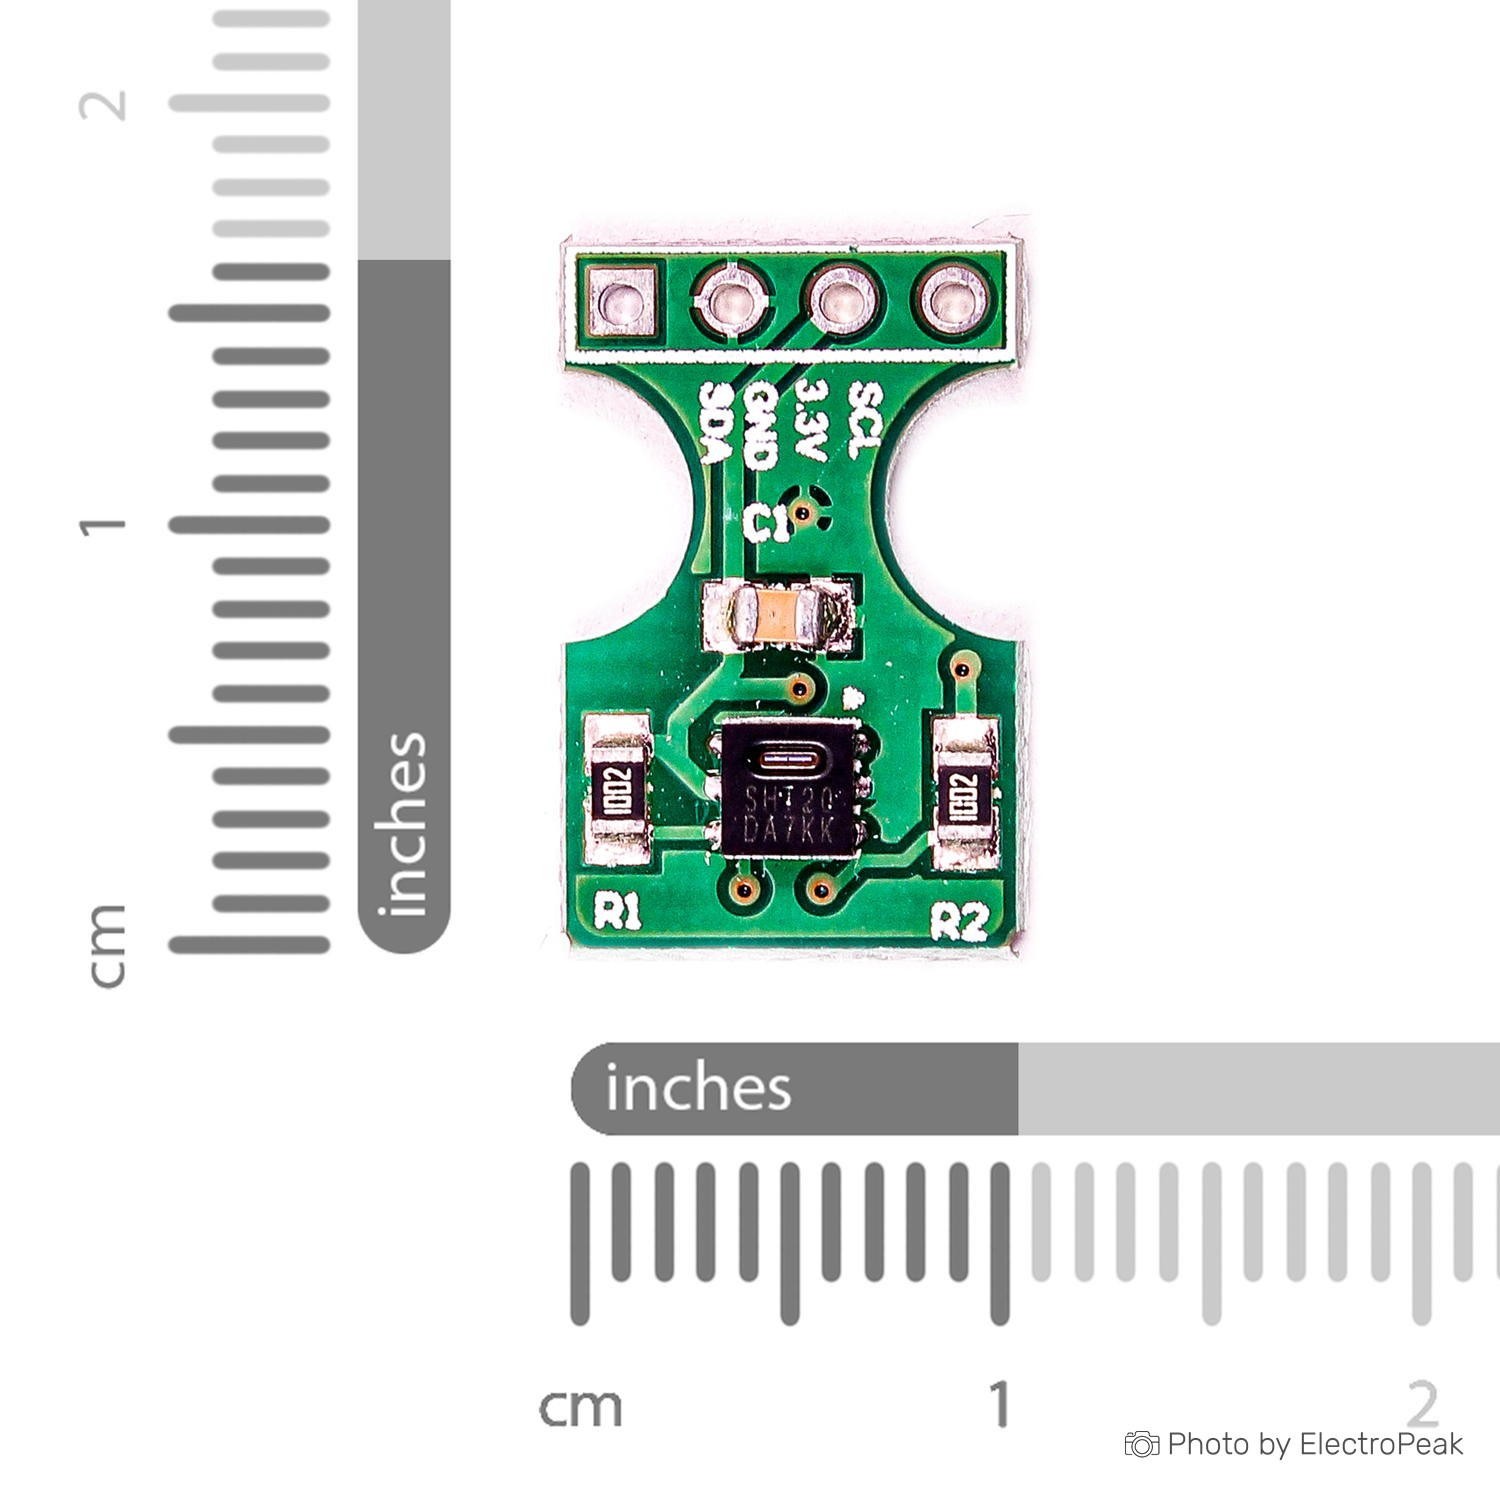 How Does Temperature and Humidity Sensor Work – 02 ?